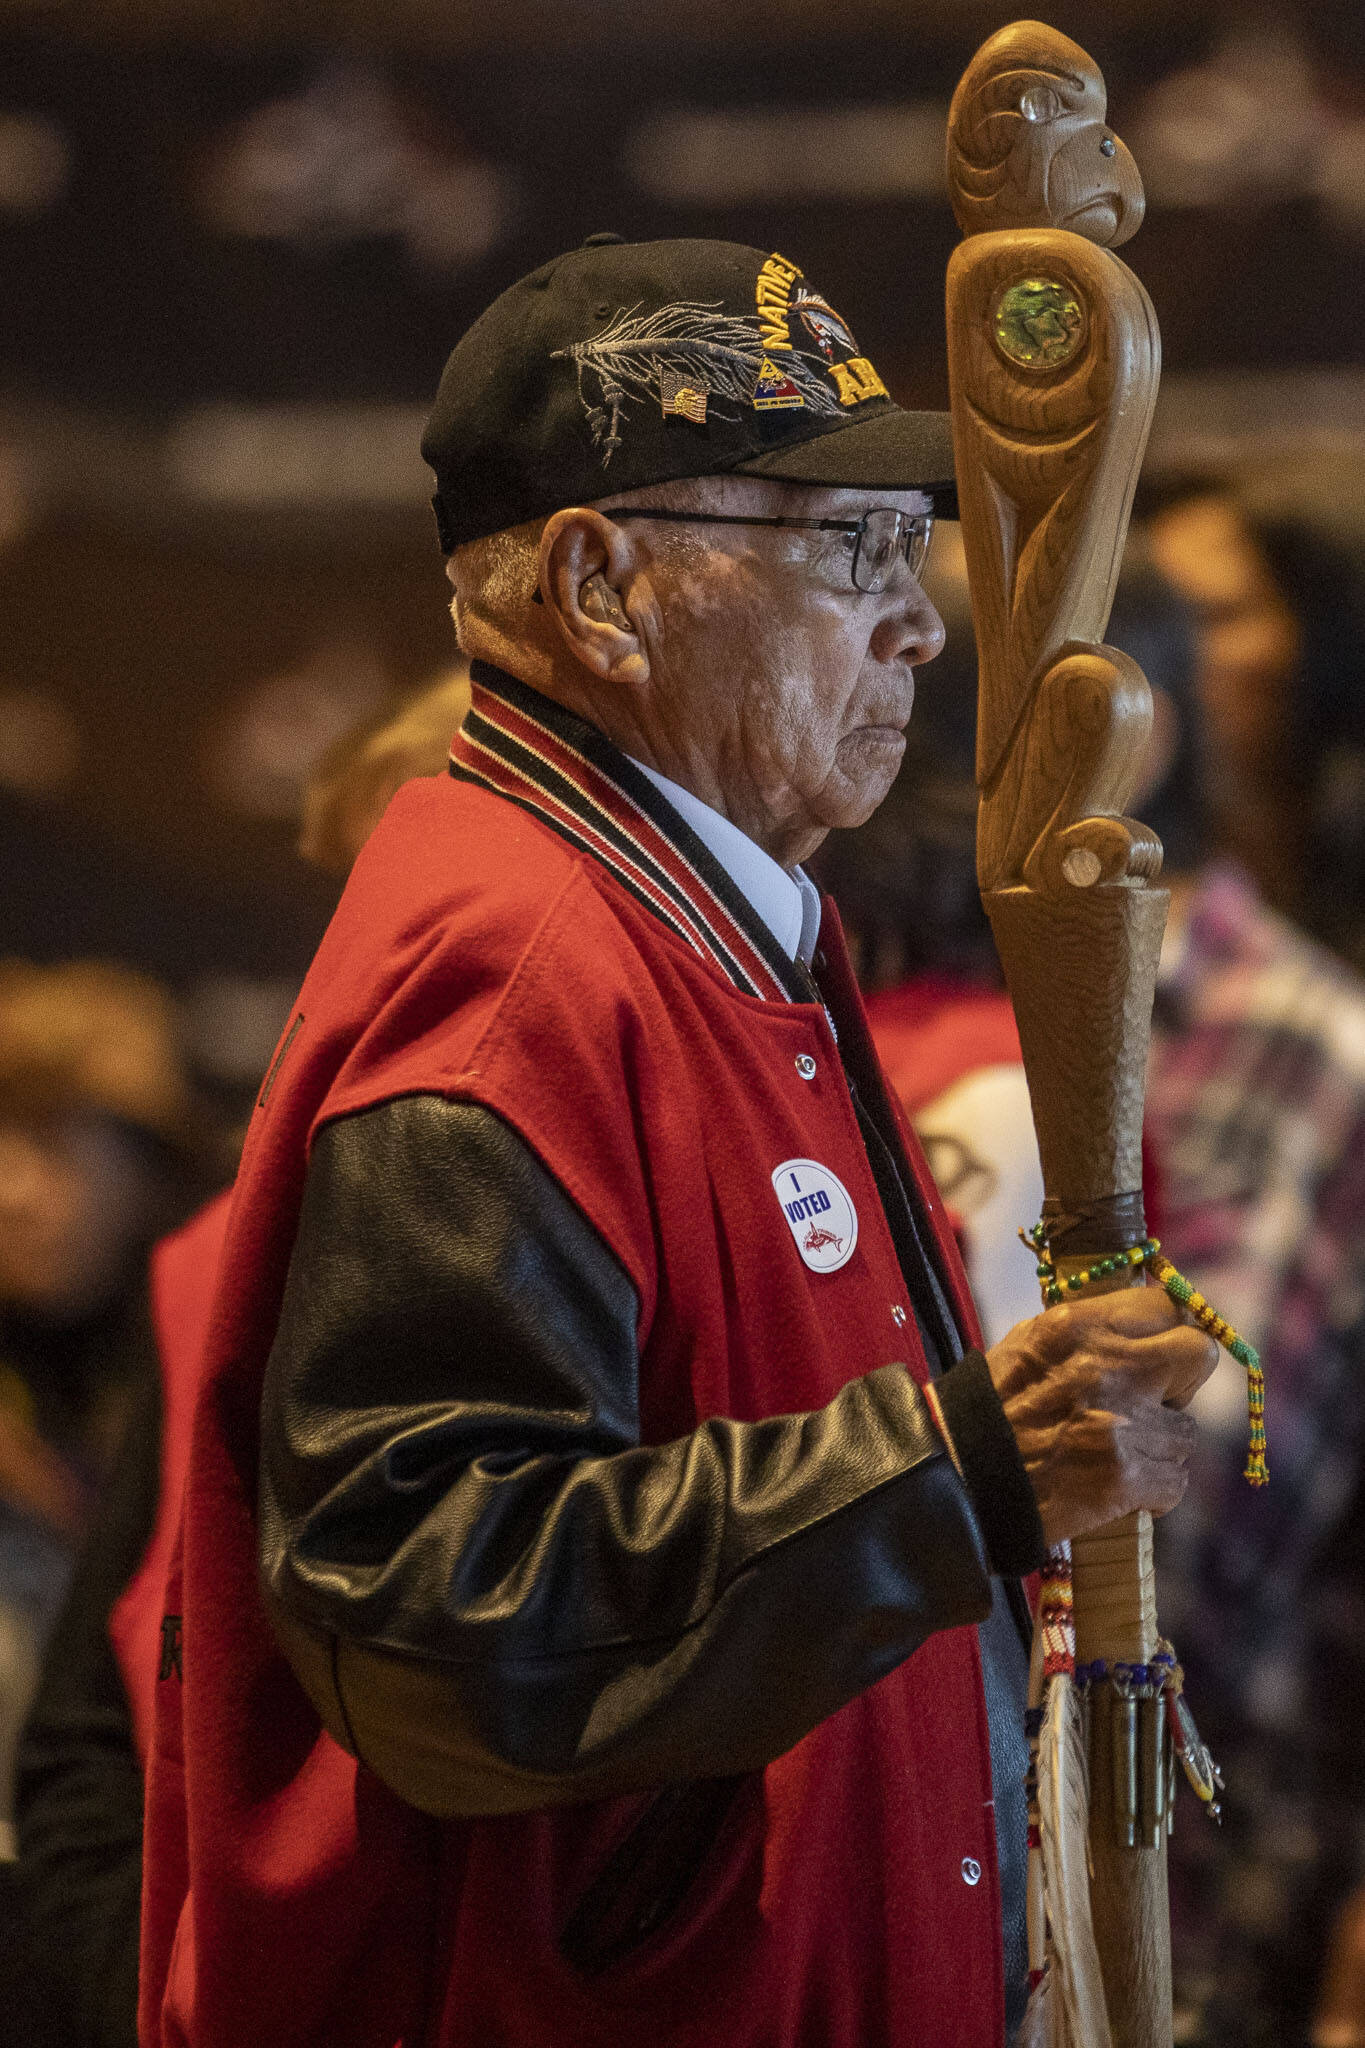 A member of the color guard walks during the procession during a Road to Healing event at the Tulalip Gathering Hall in Marysville, Washington on Sunday, April 23, 2023. The tour is lead by United States Secretary of the Interior Deb Haaland and Department of the Interior Assistant Secretary Bryan Newland. (Annie Barker / The Herald)